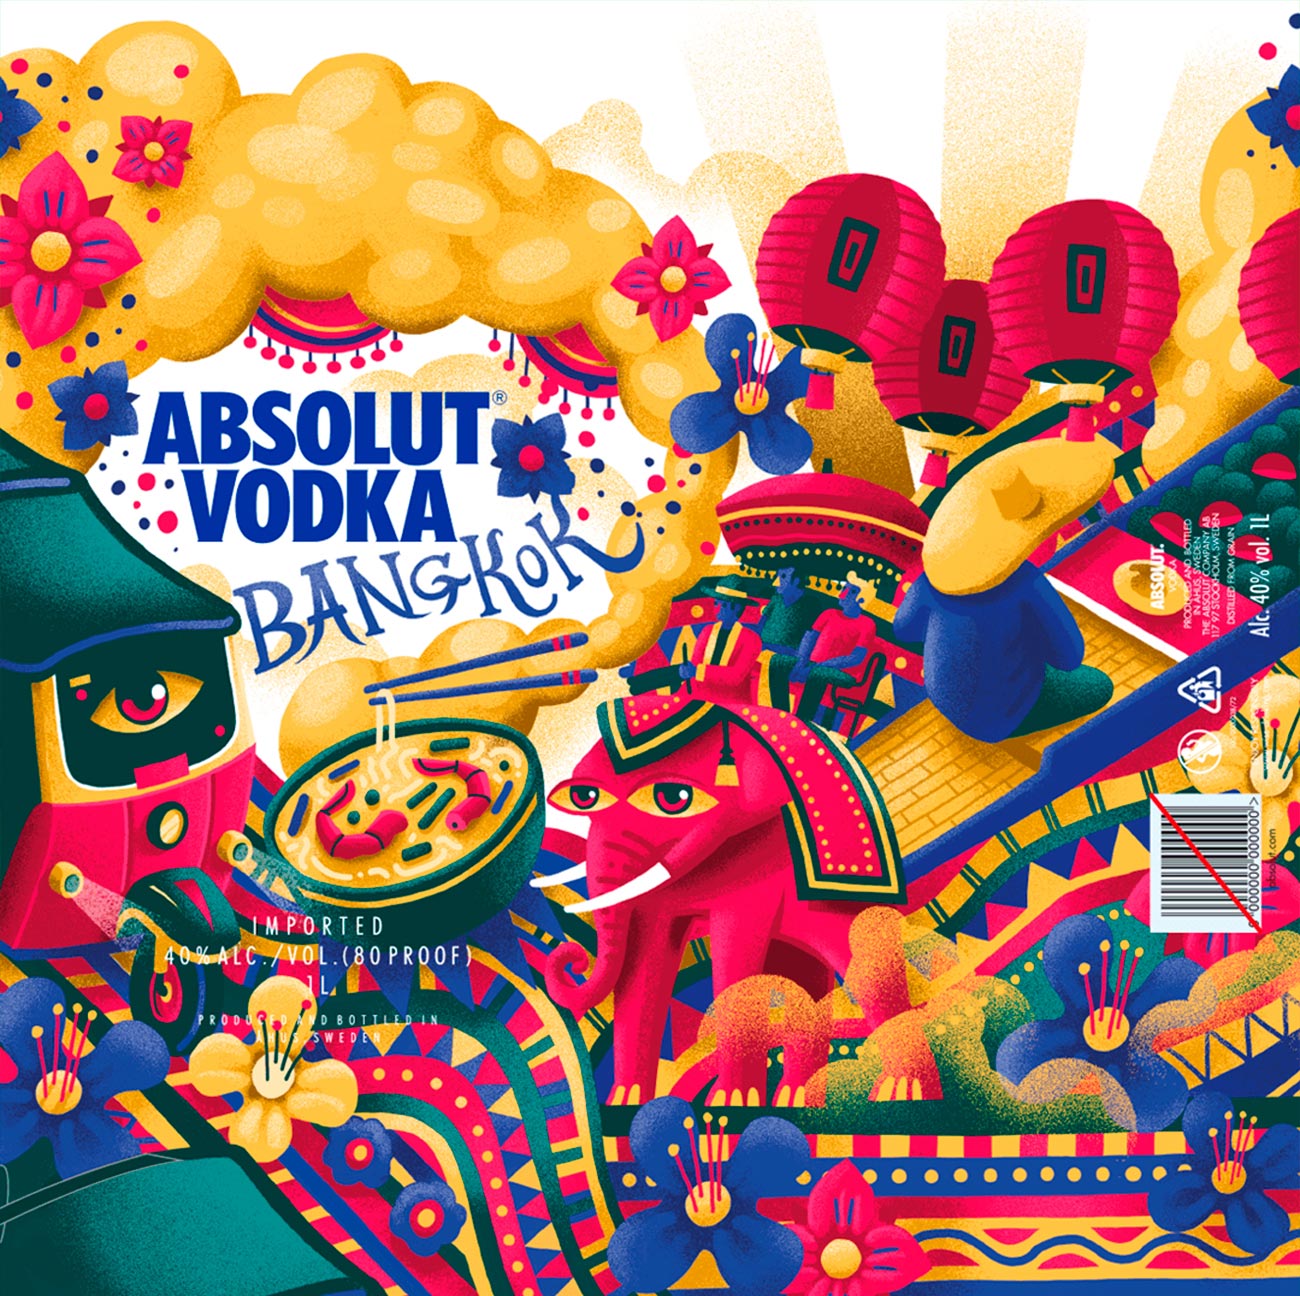 Illustration Absolut packaging by Sr.Reny